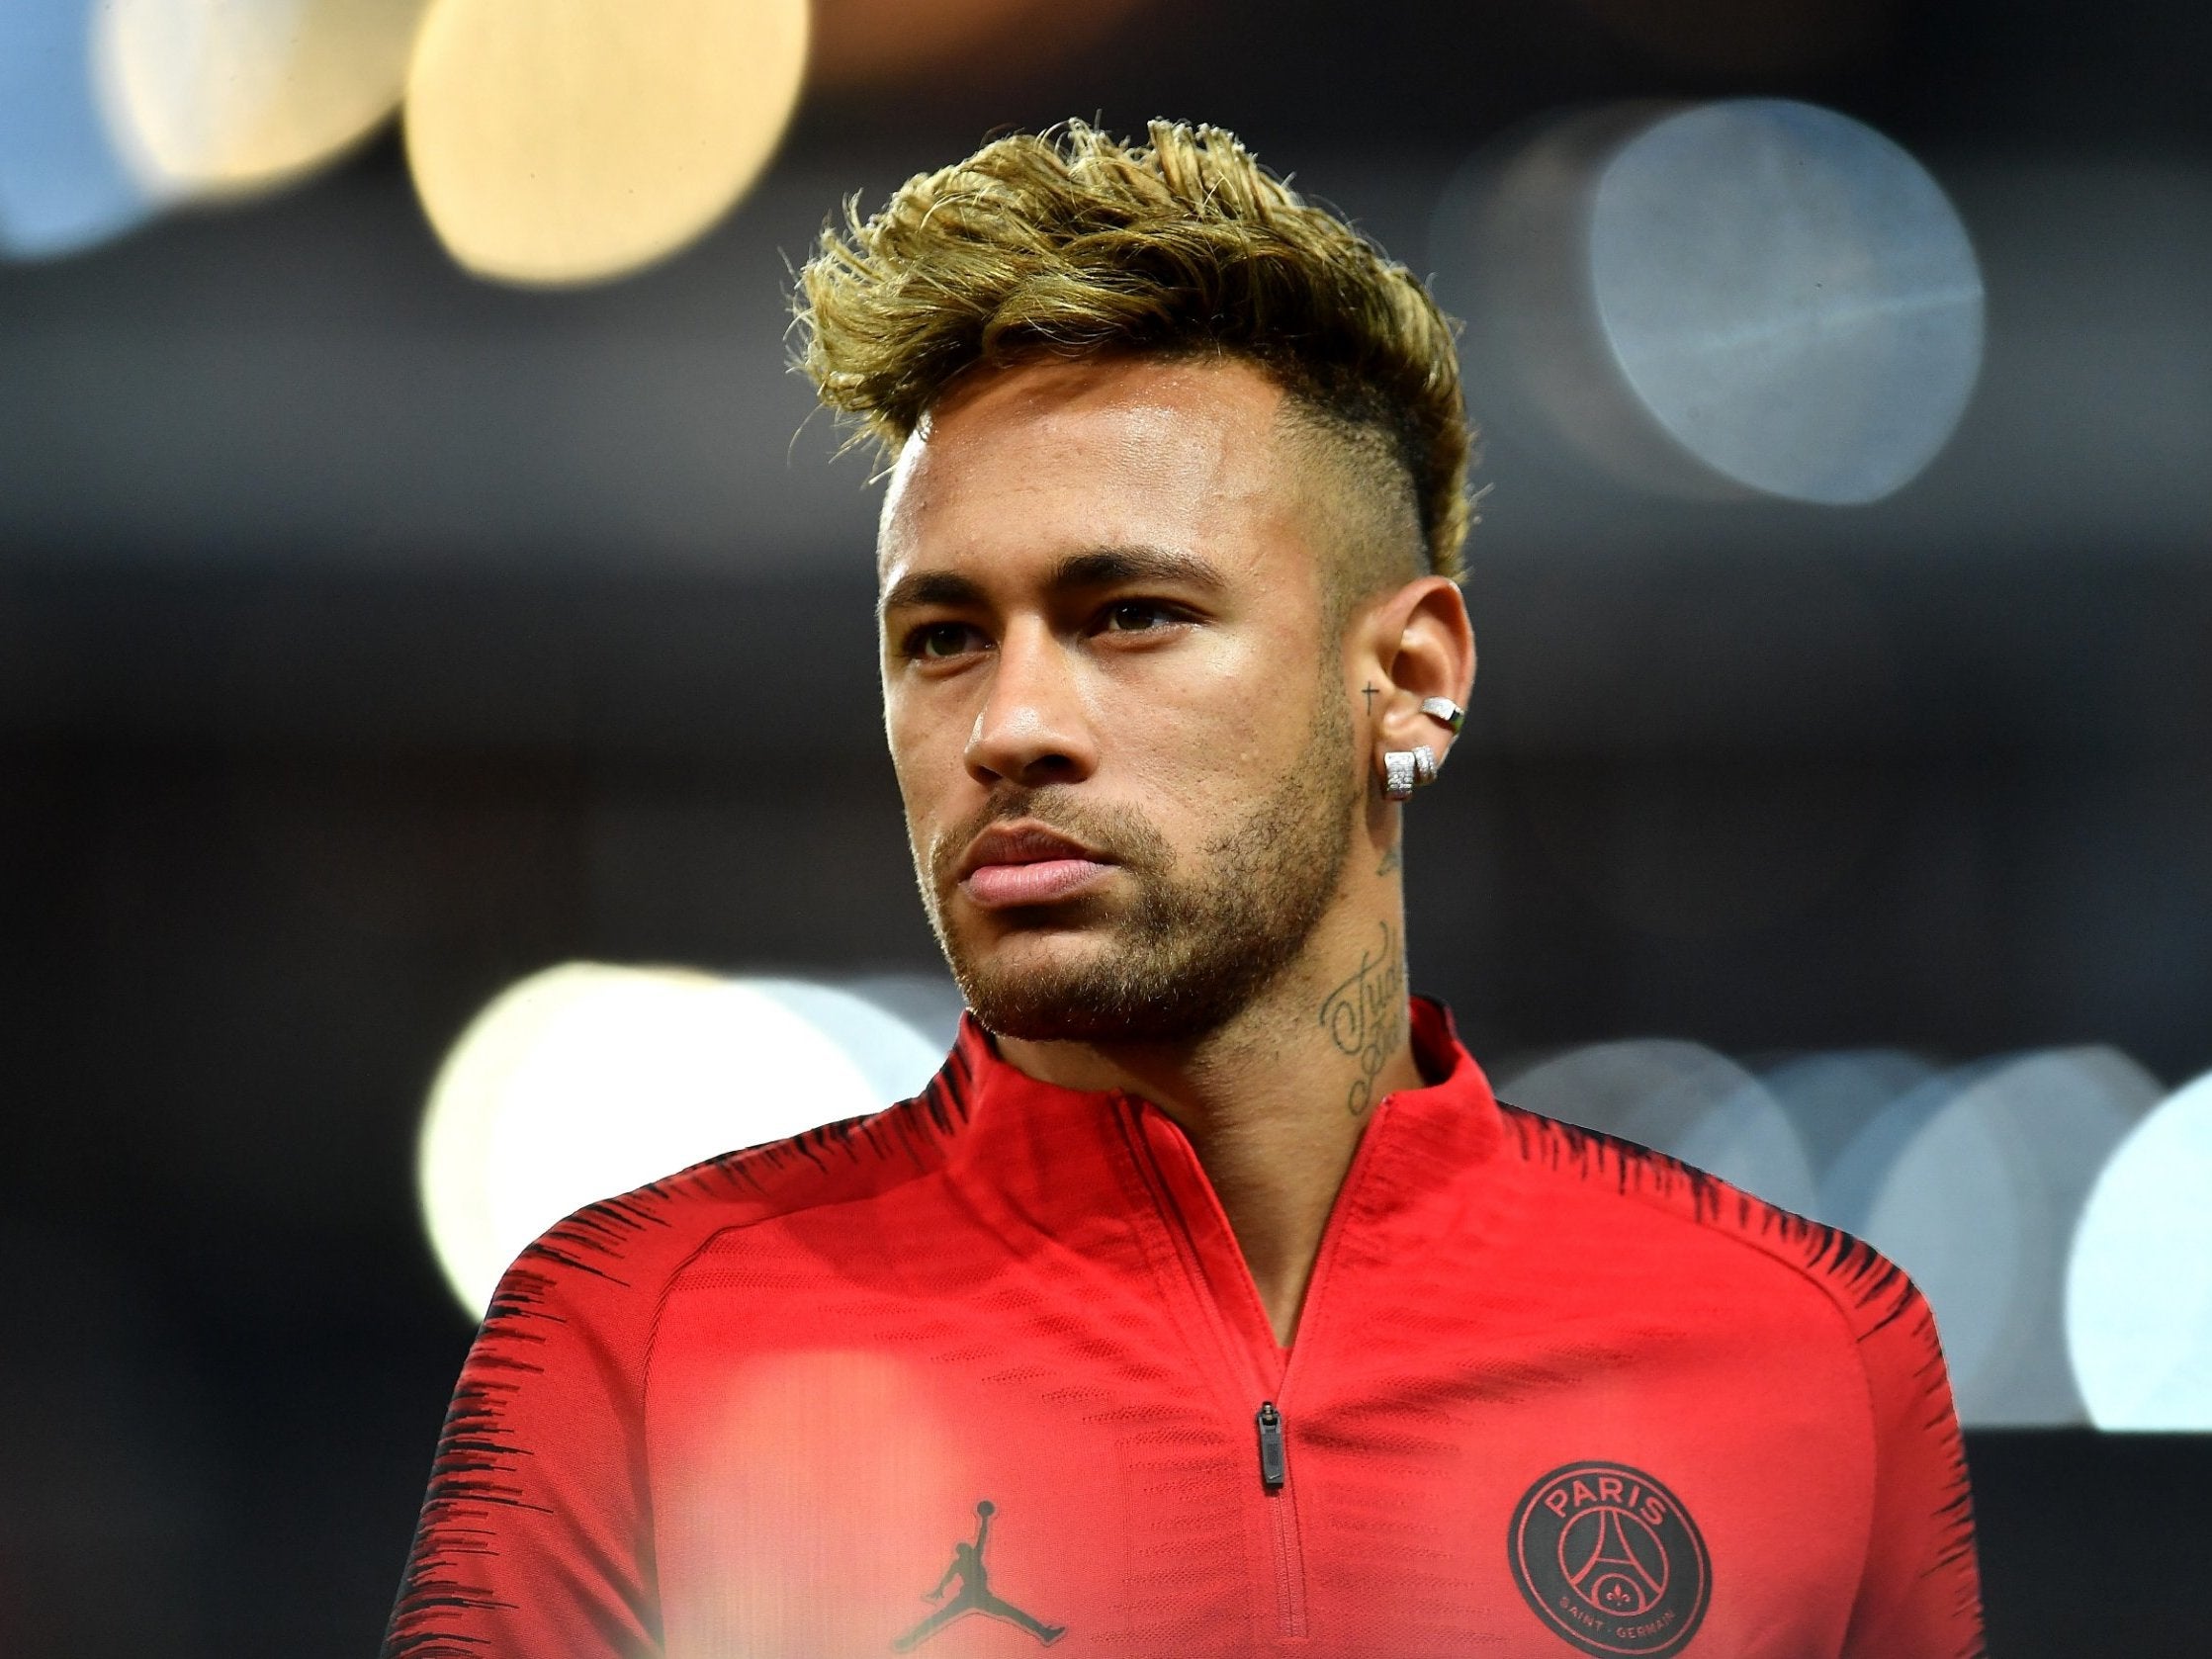 Neymar could face up to six years in prison if found ...